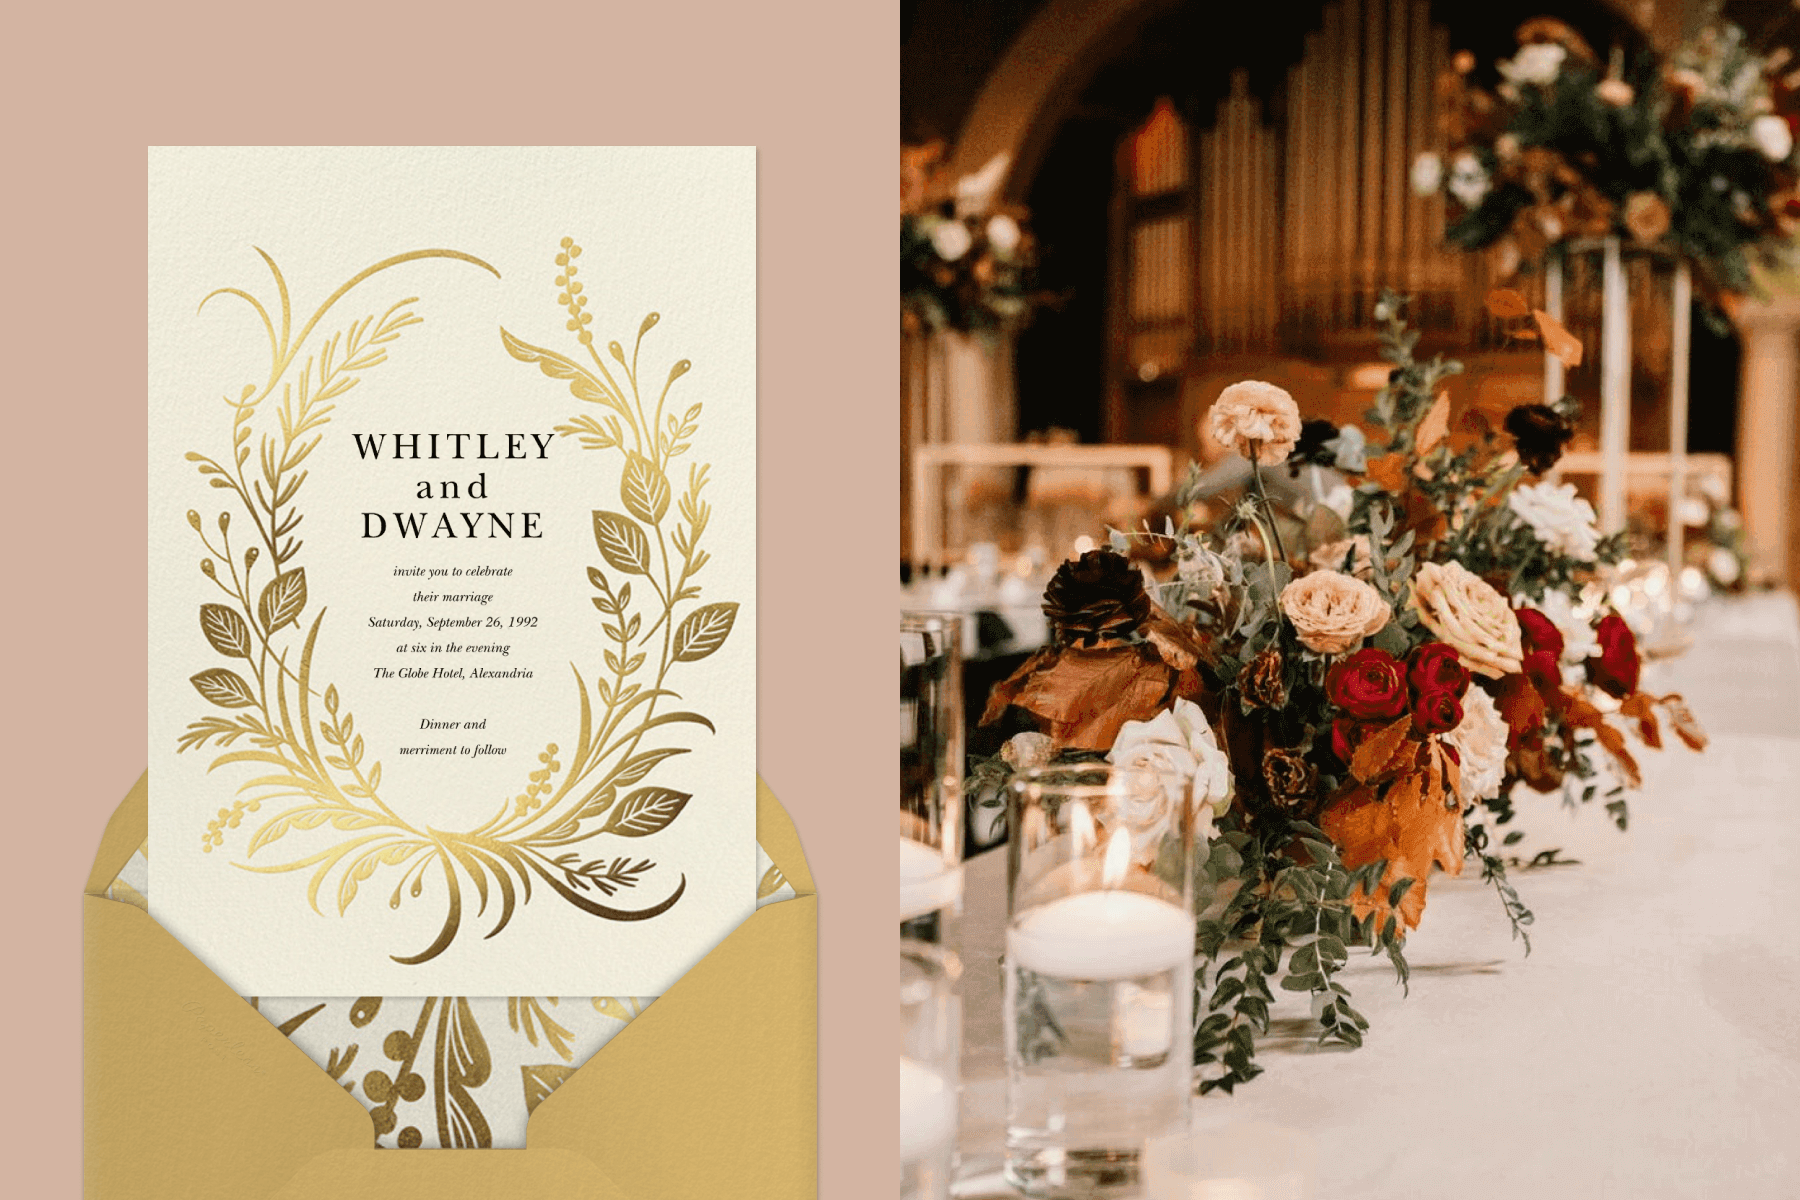 left: A wedding invitation with a gold foil wreath of leaves and grasses. Right: An autumnal floral table centerpiece.